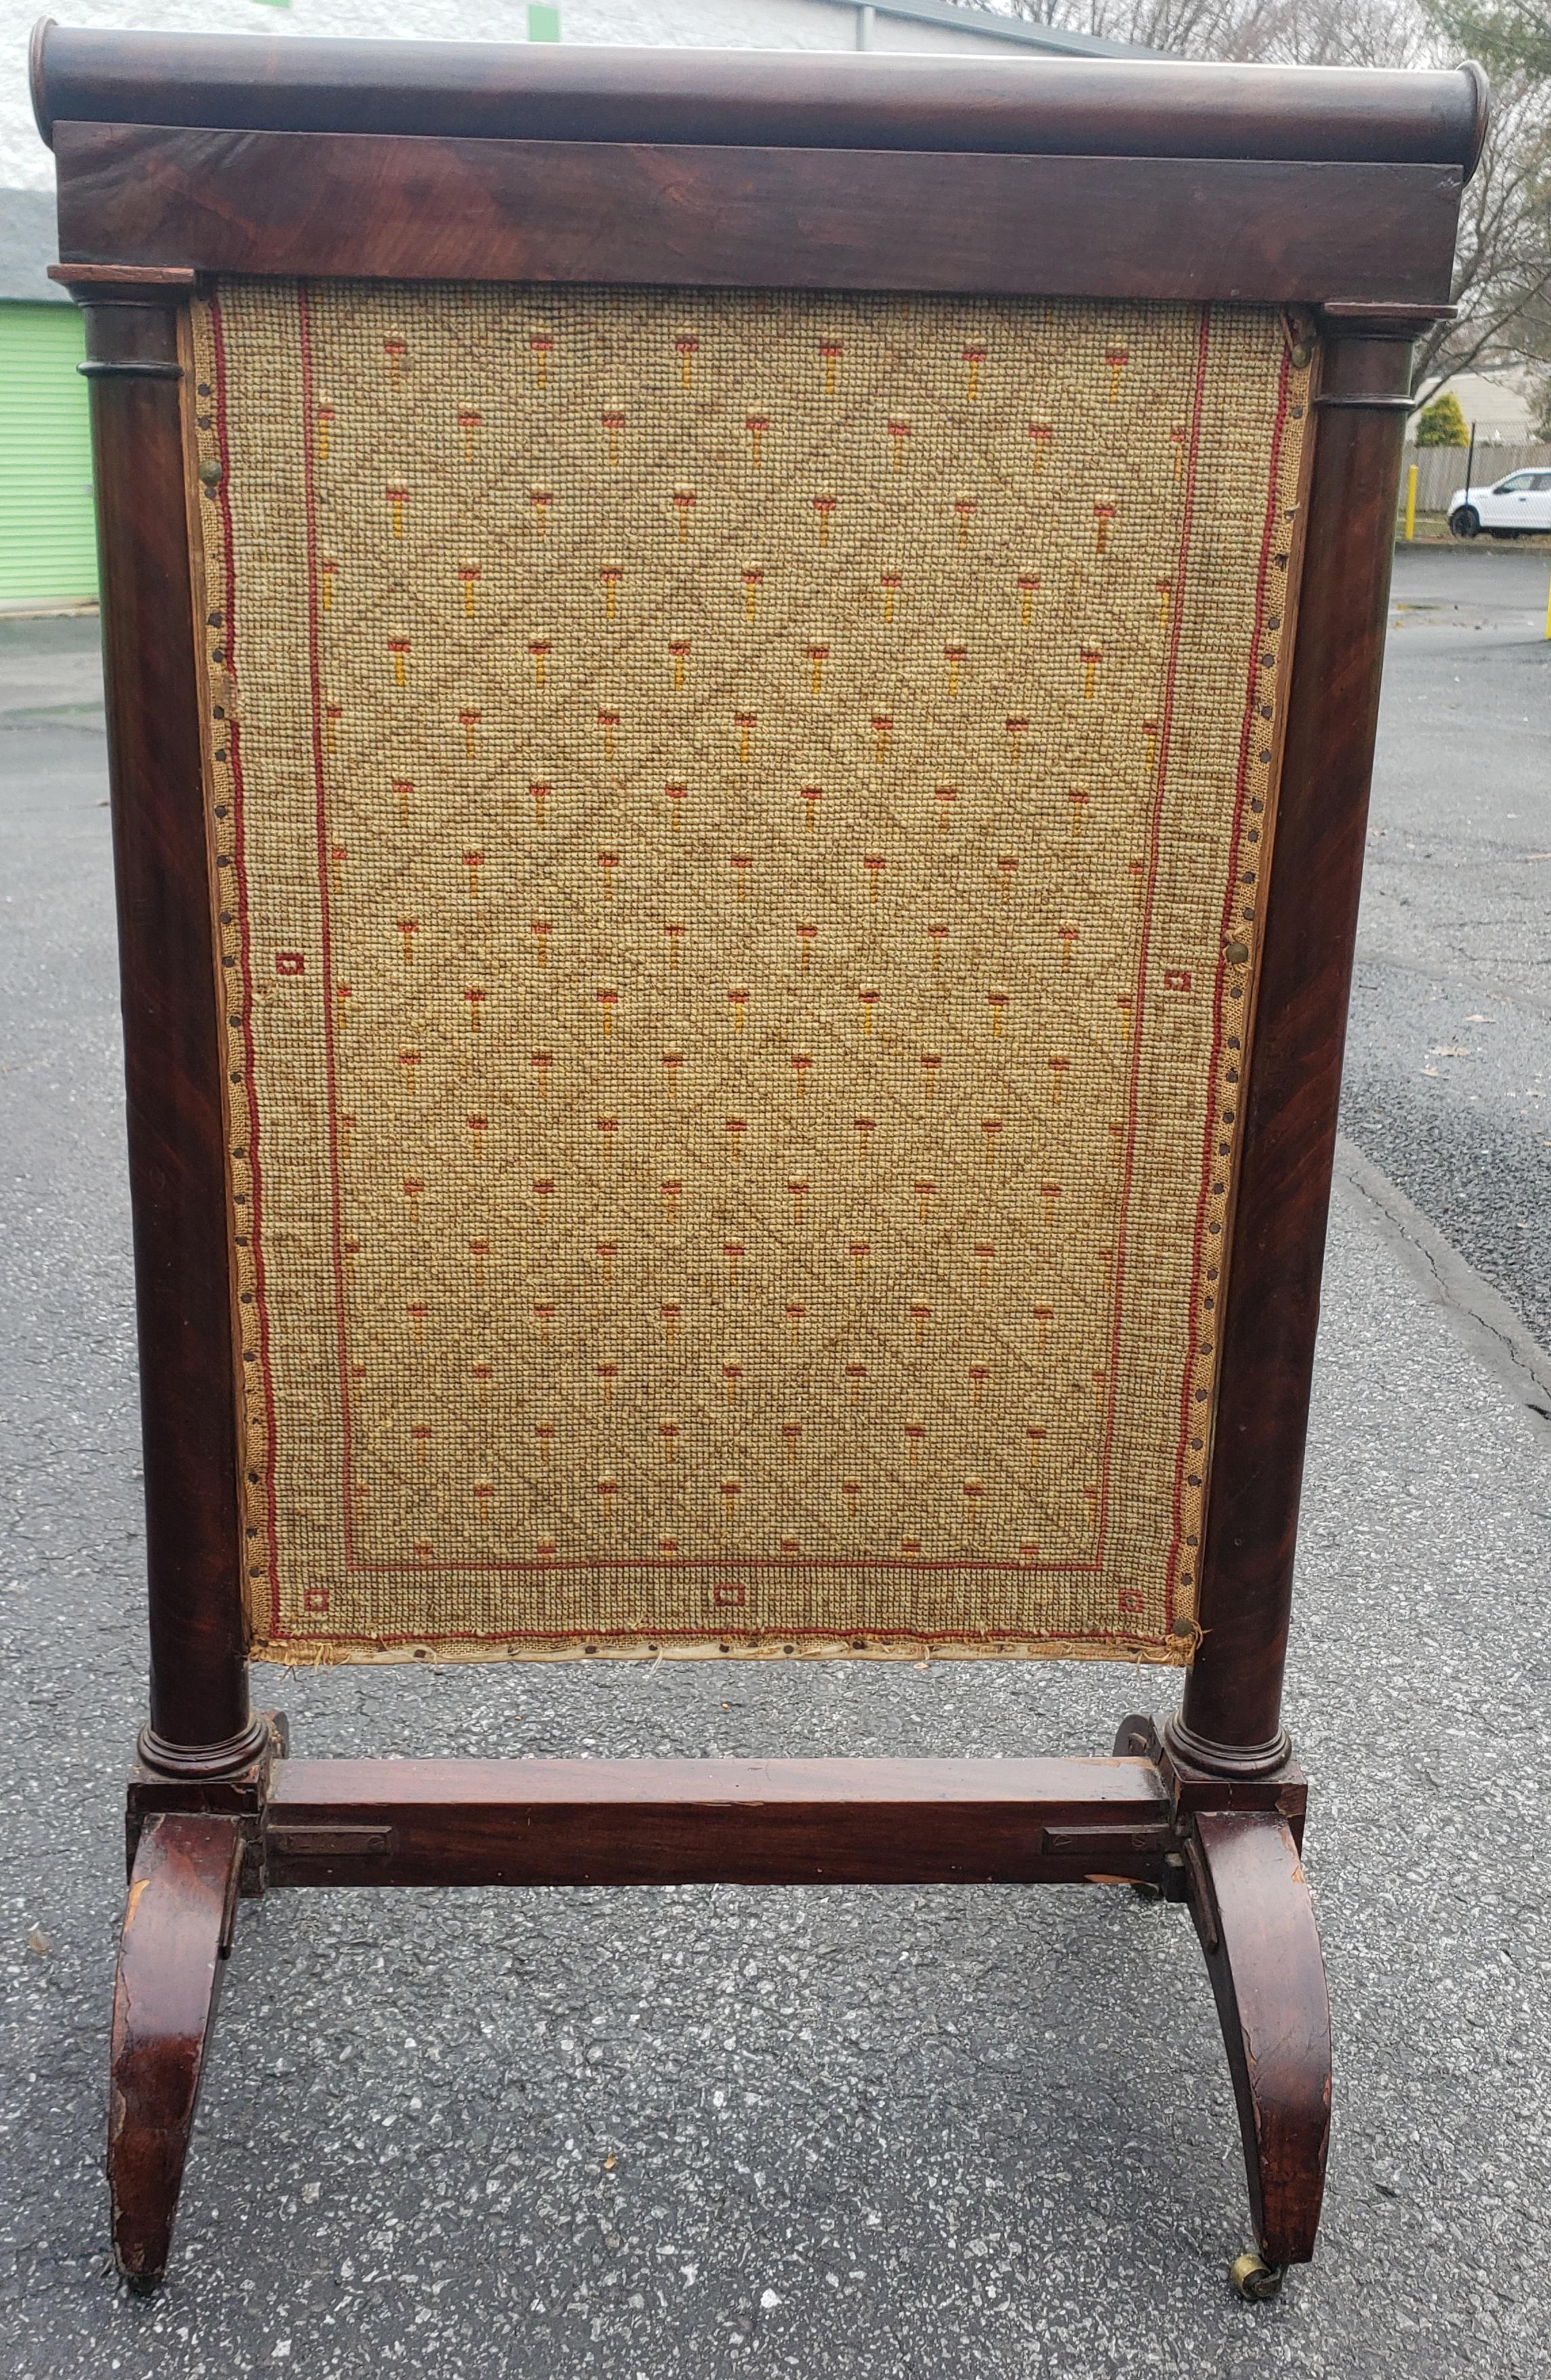 19th century American Empire Mahogany and needlepoint fireplace screen on wheels.
Measures 22